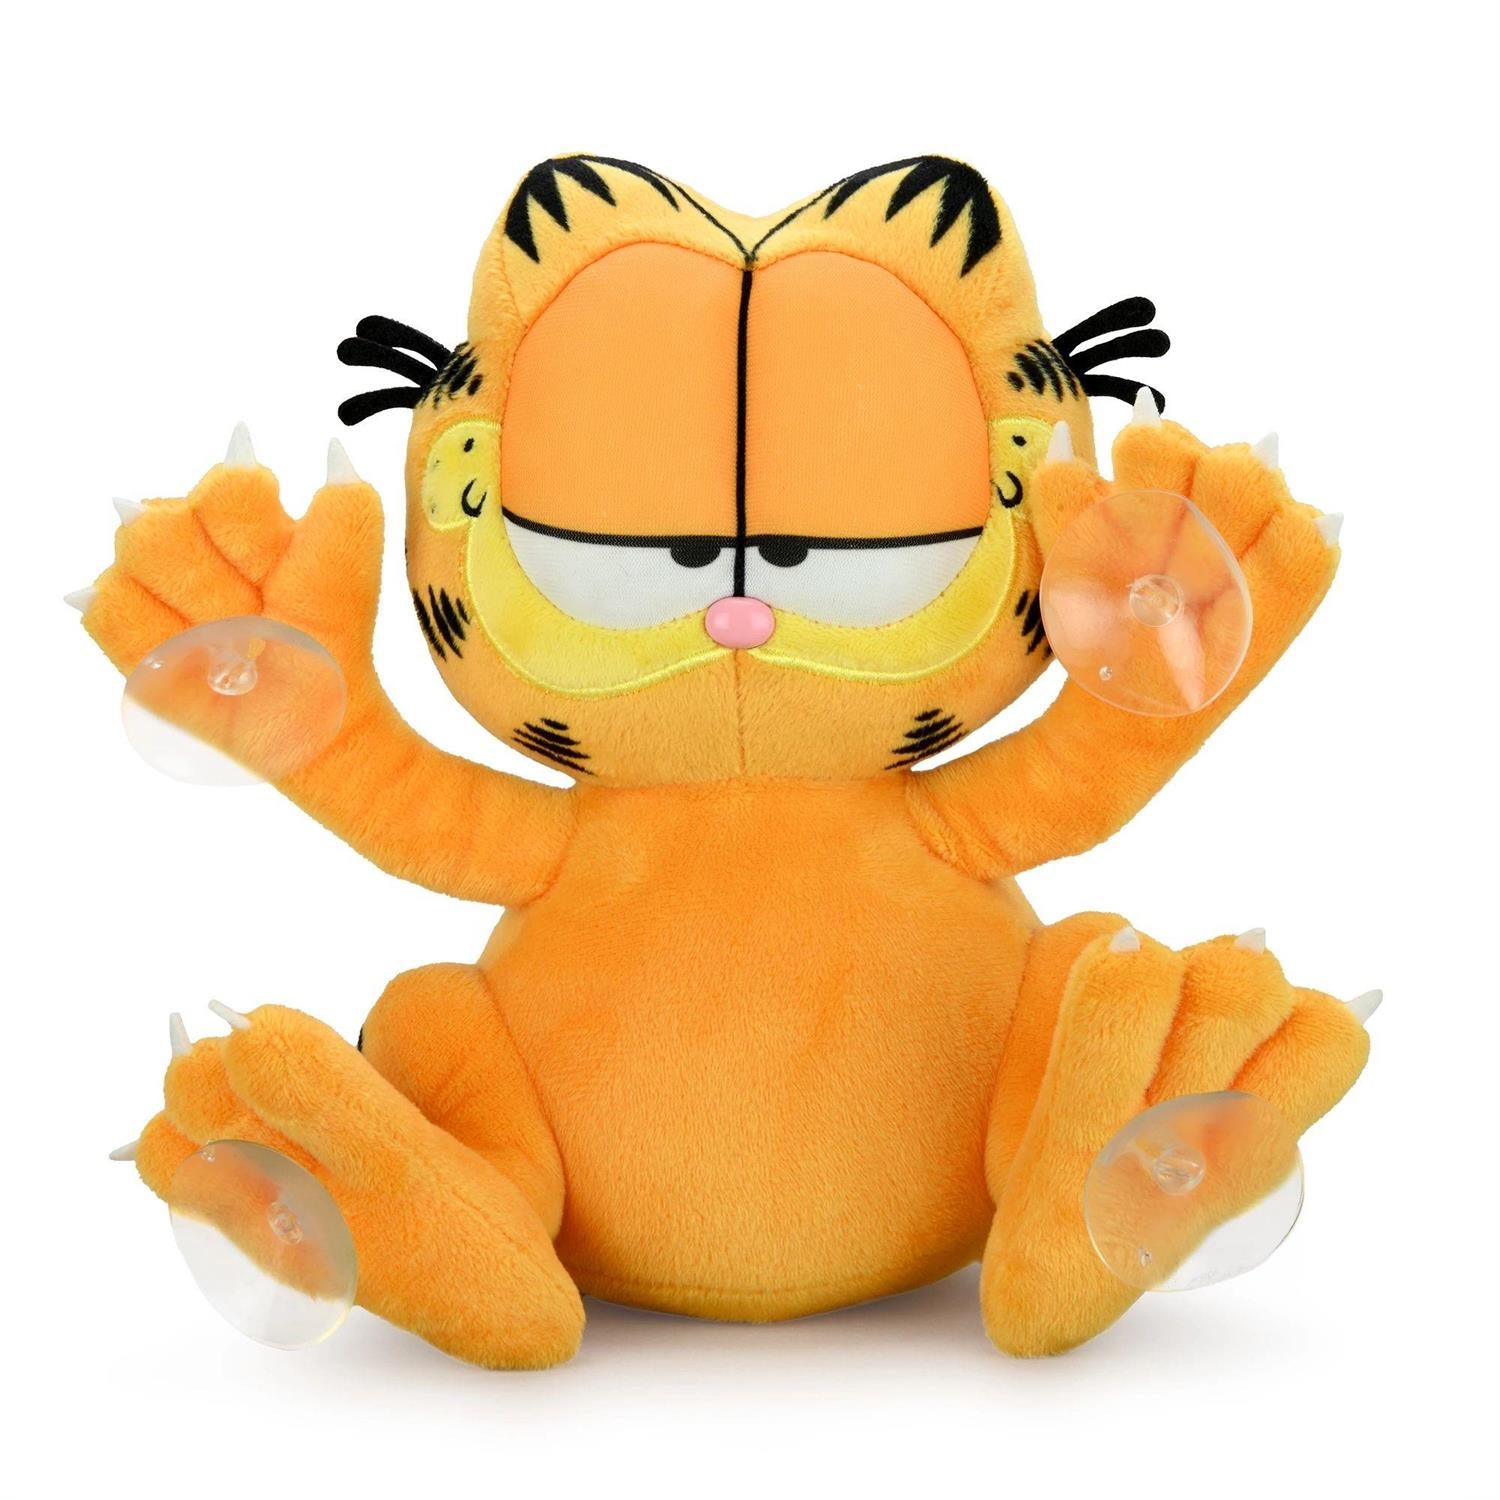 Collection of Iconic Character Plush Toys Including Garfield, Odie, Fozzie Bear, SpongeBob, Patrick, ALF, and Gizmo